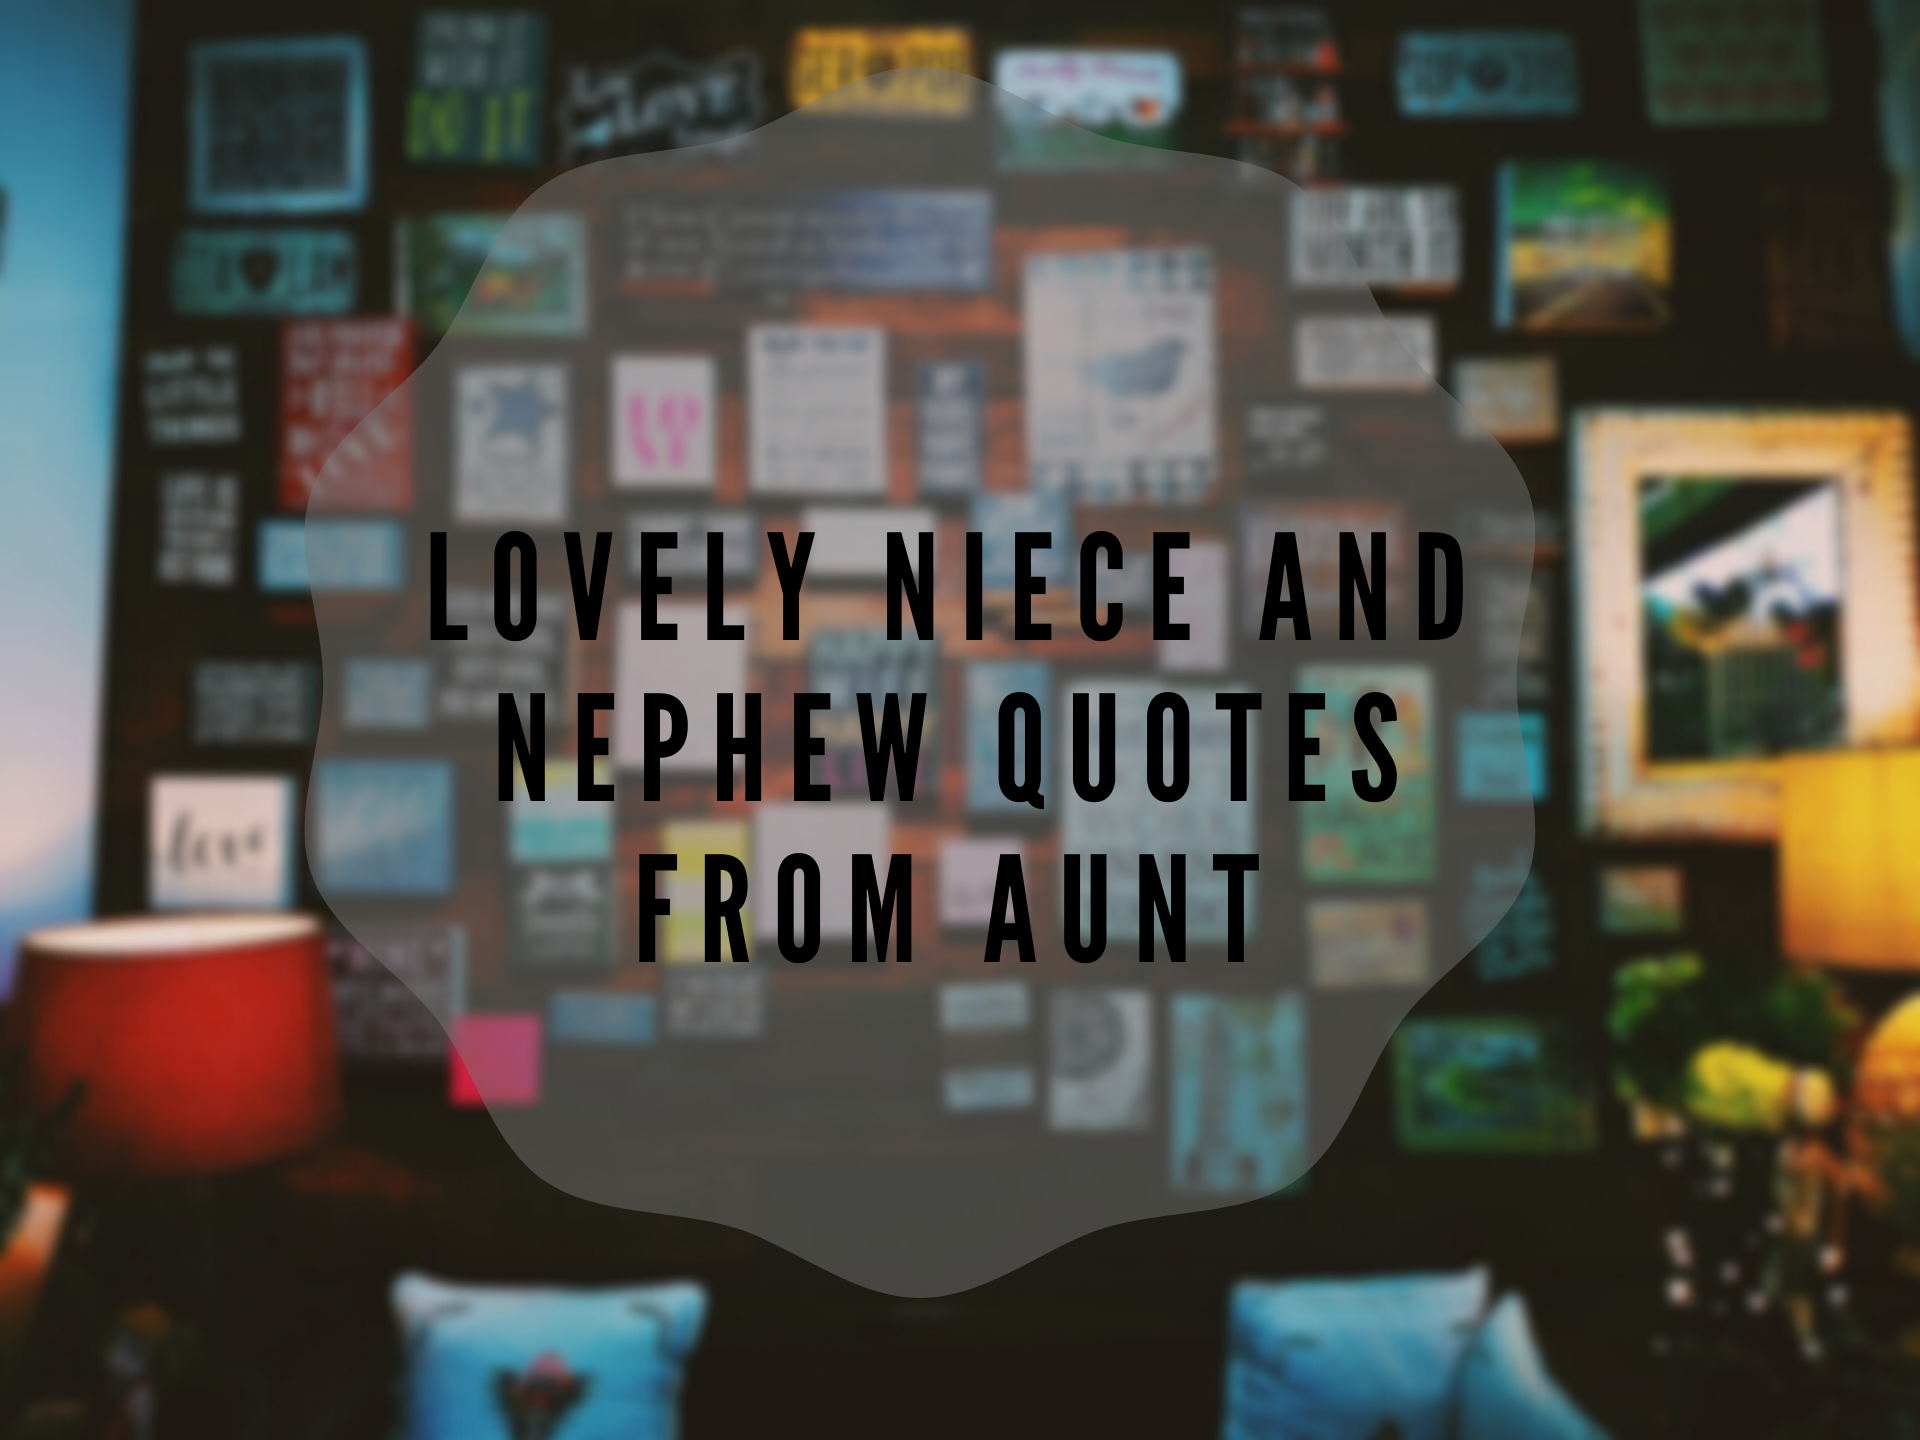 Lovely Niece And Nephew Quotes From Aunt Tuko Co Ke - feelings words quotes quotes sayings favs quotes s roblox